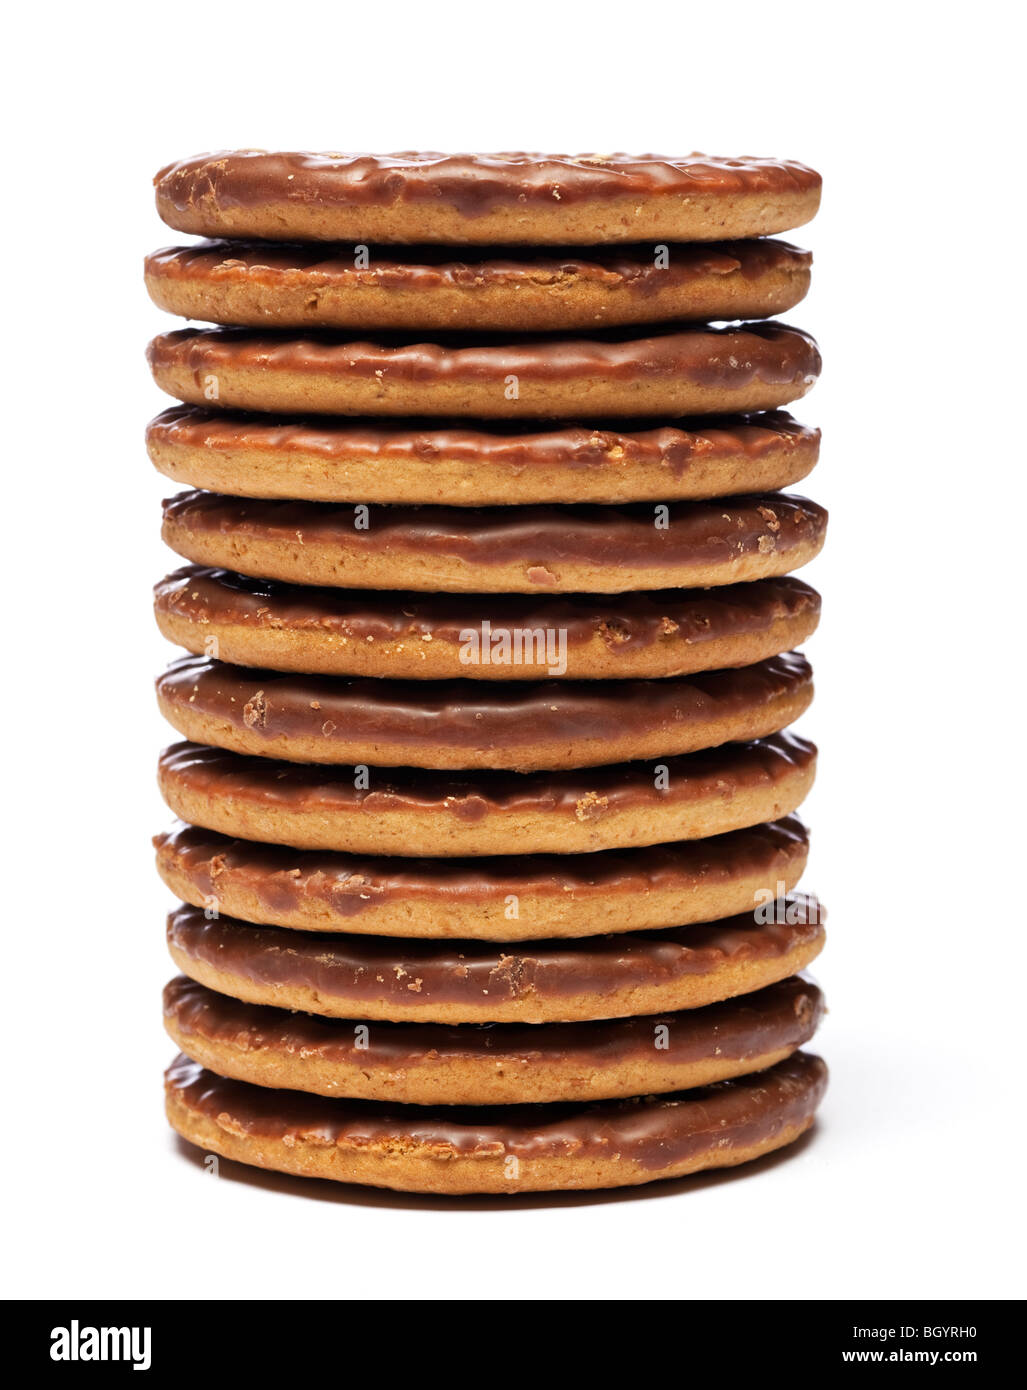 Pile of milk chocolate digestive biscuits stack Stock Photo